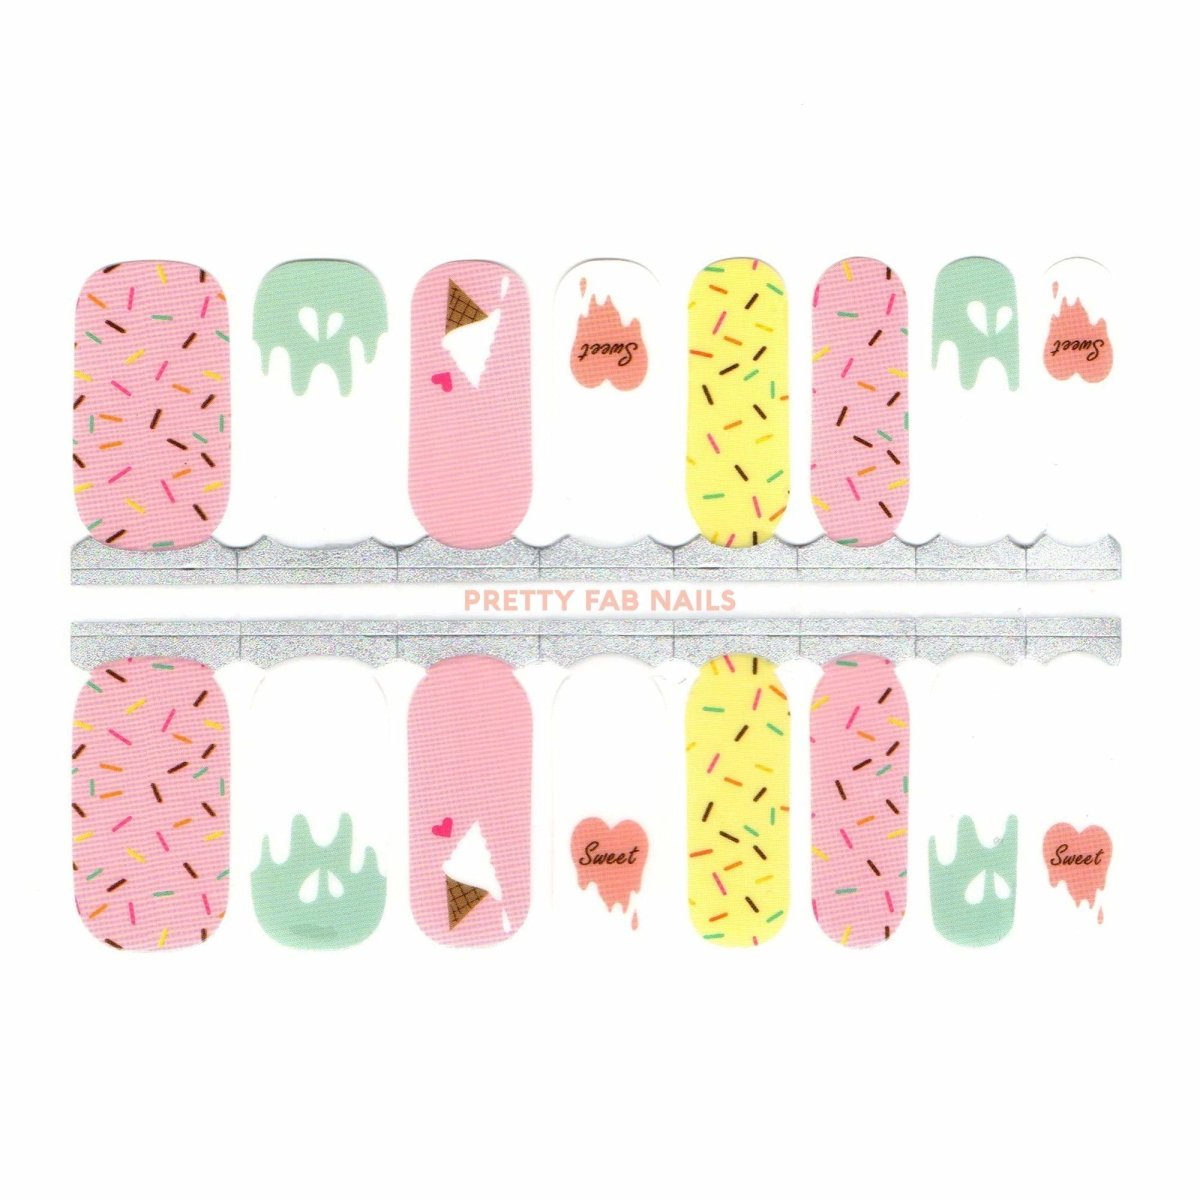 Ice Cream and Sprinkles Nail Polish Wraps - Pretty Fab Nails